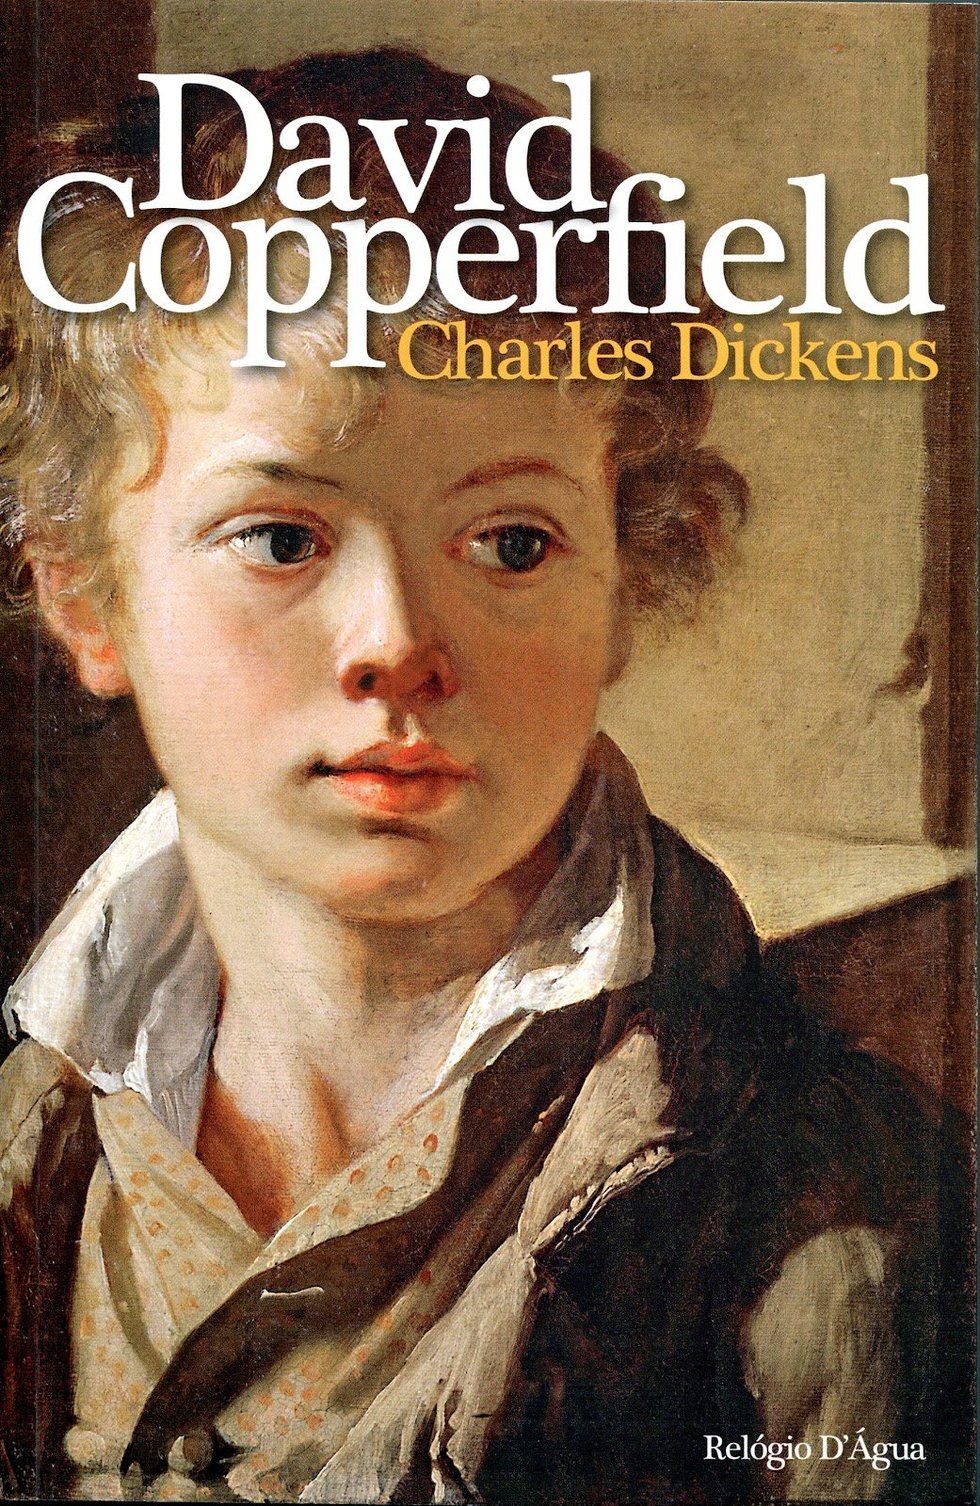 david-copperfield-charles-dickens